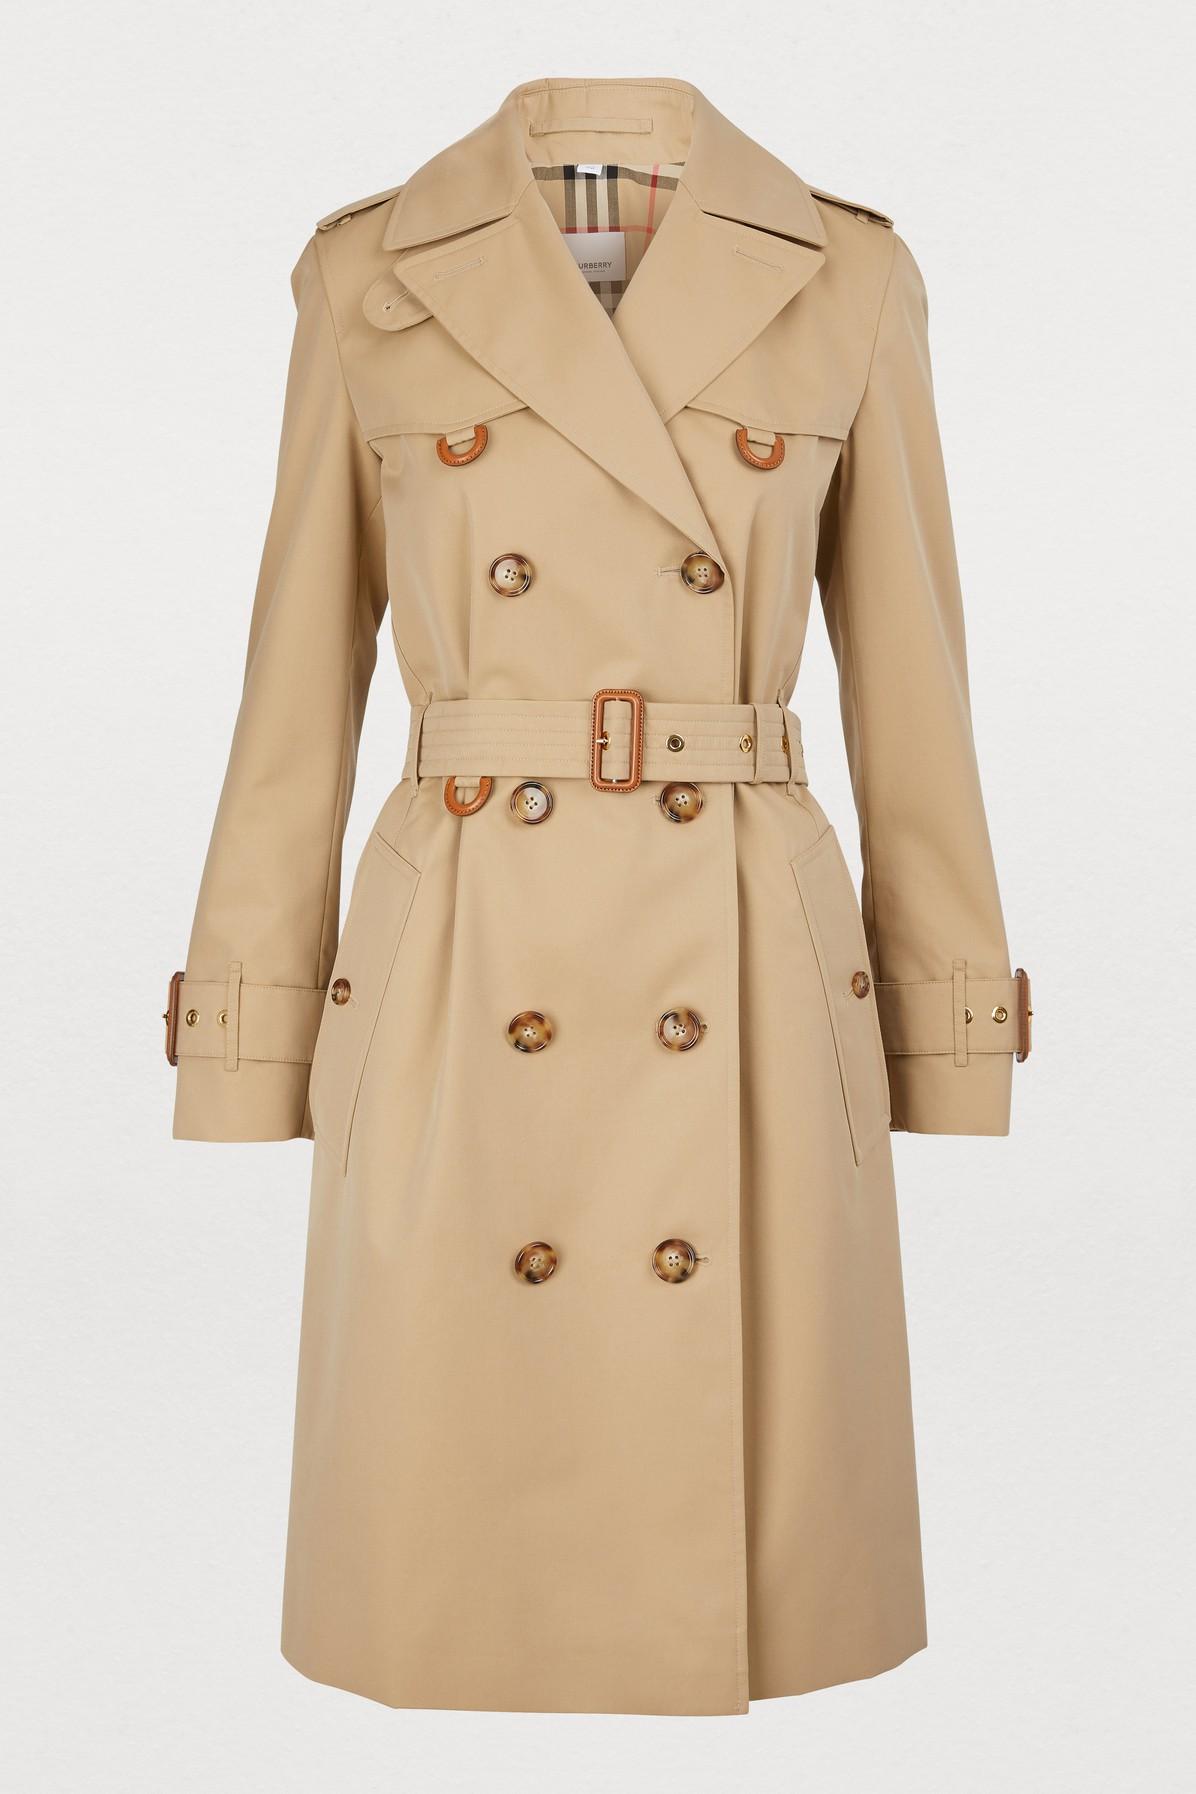 Burberry Islington Trench in Natural - Lyst